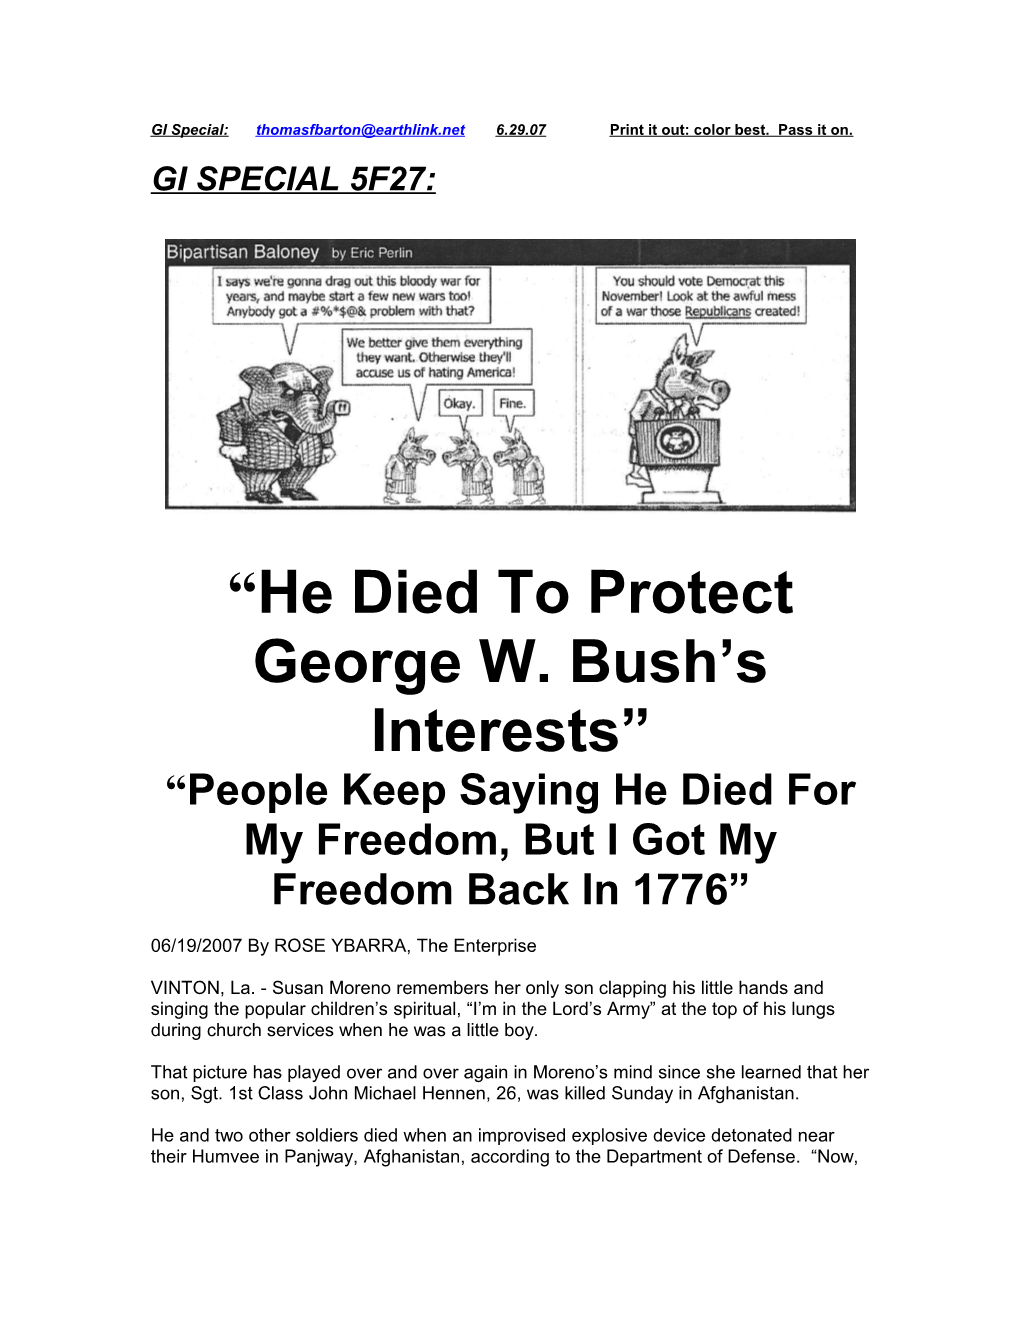 He Died to Protect George W. Bush S Interests